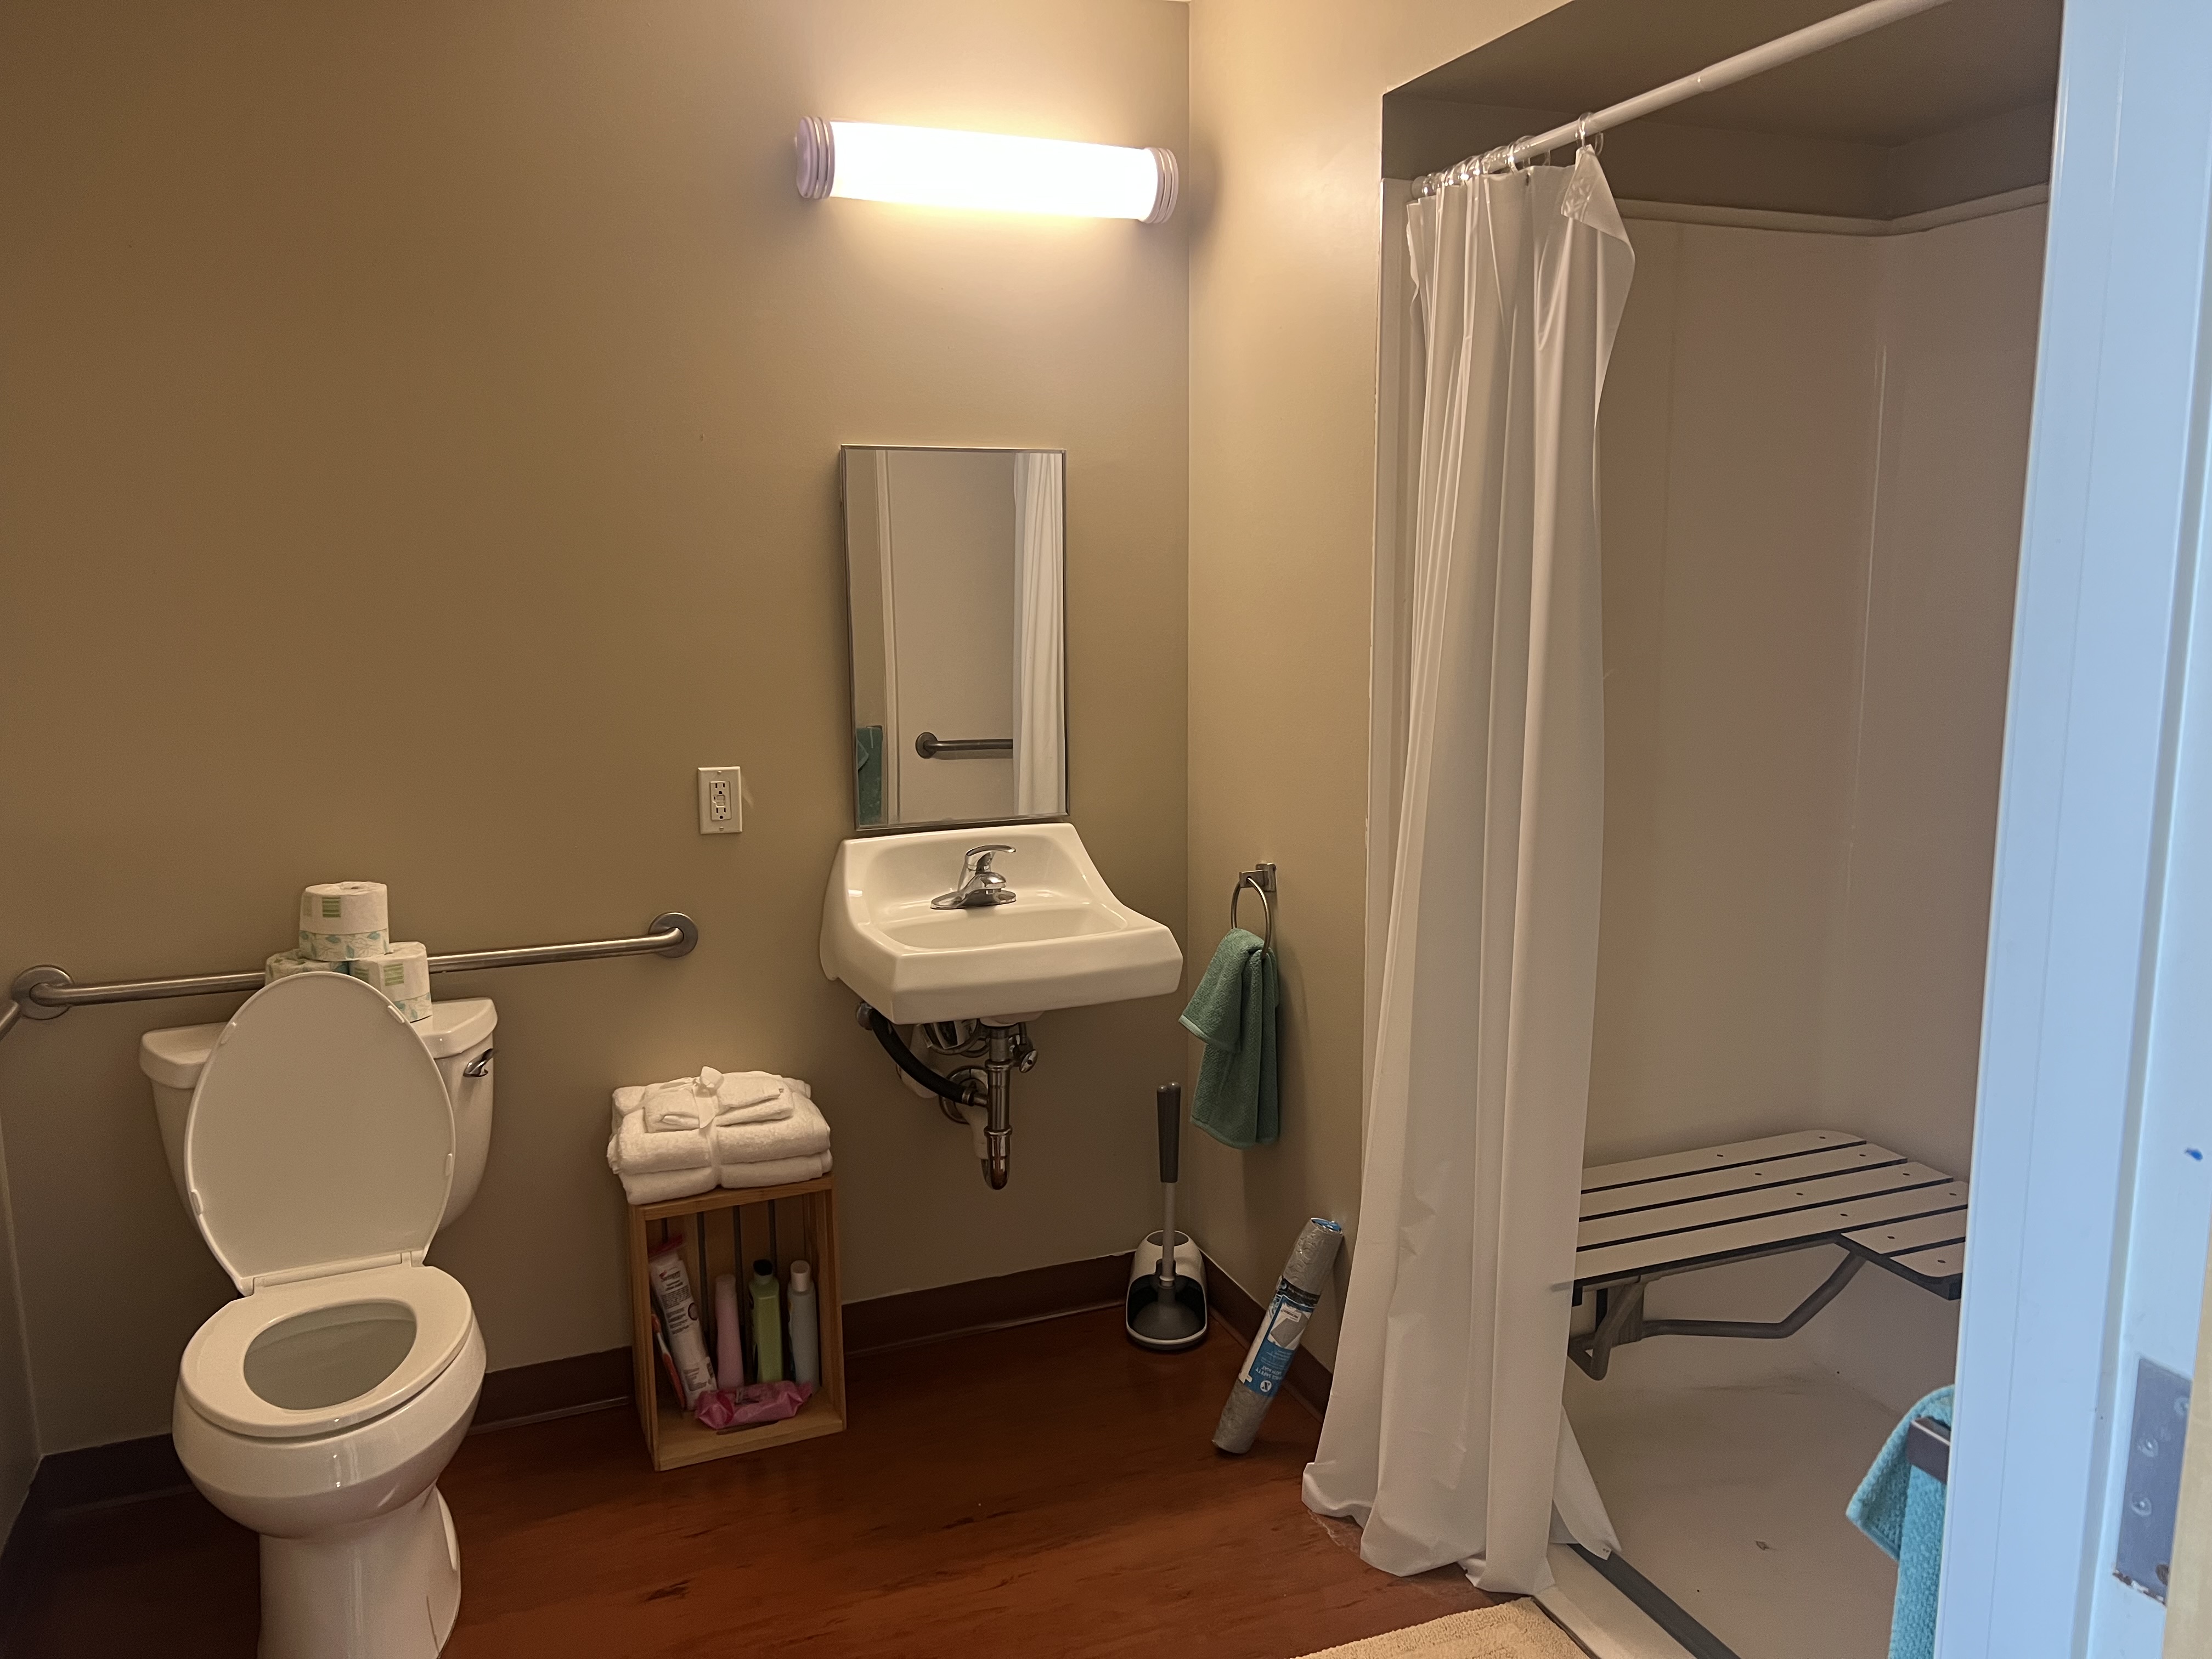 Bathroom with grab bars behind the toilet and roll-in shower with seat. Plenty of linen towels; small mirror over the sink.